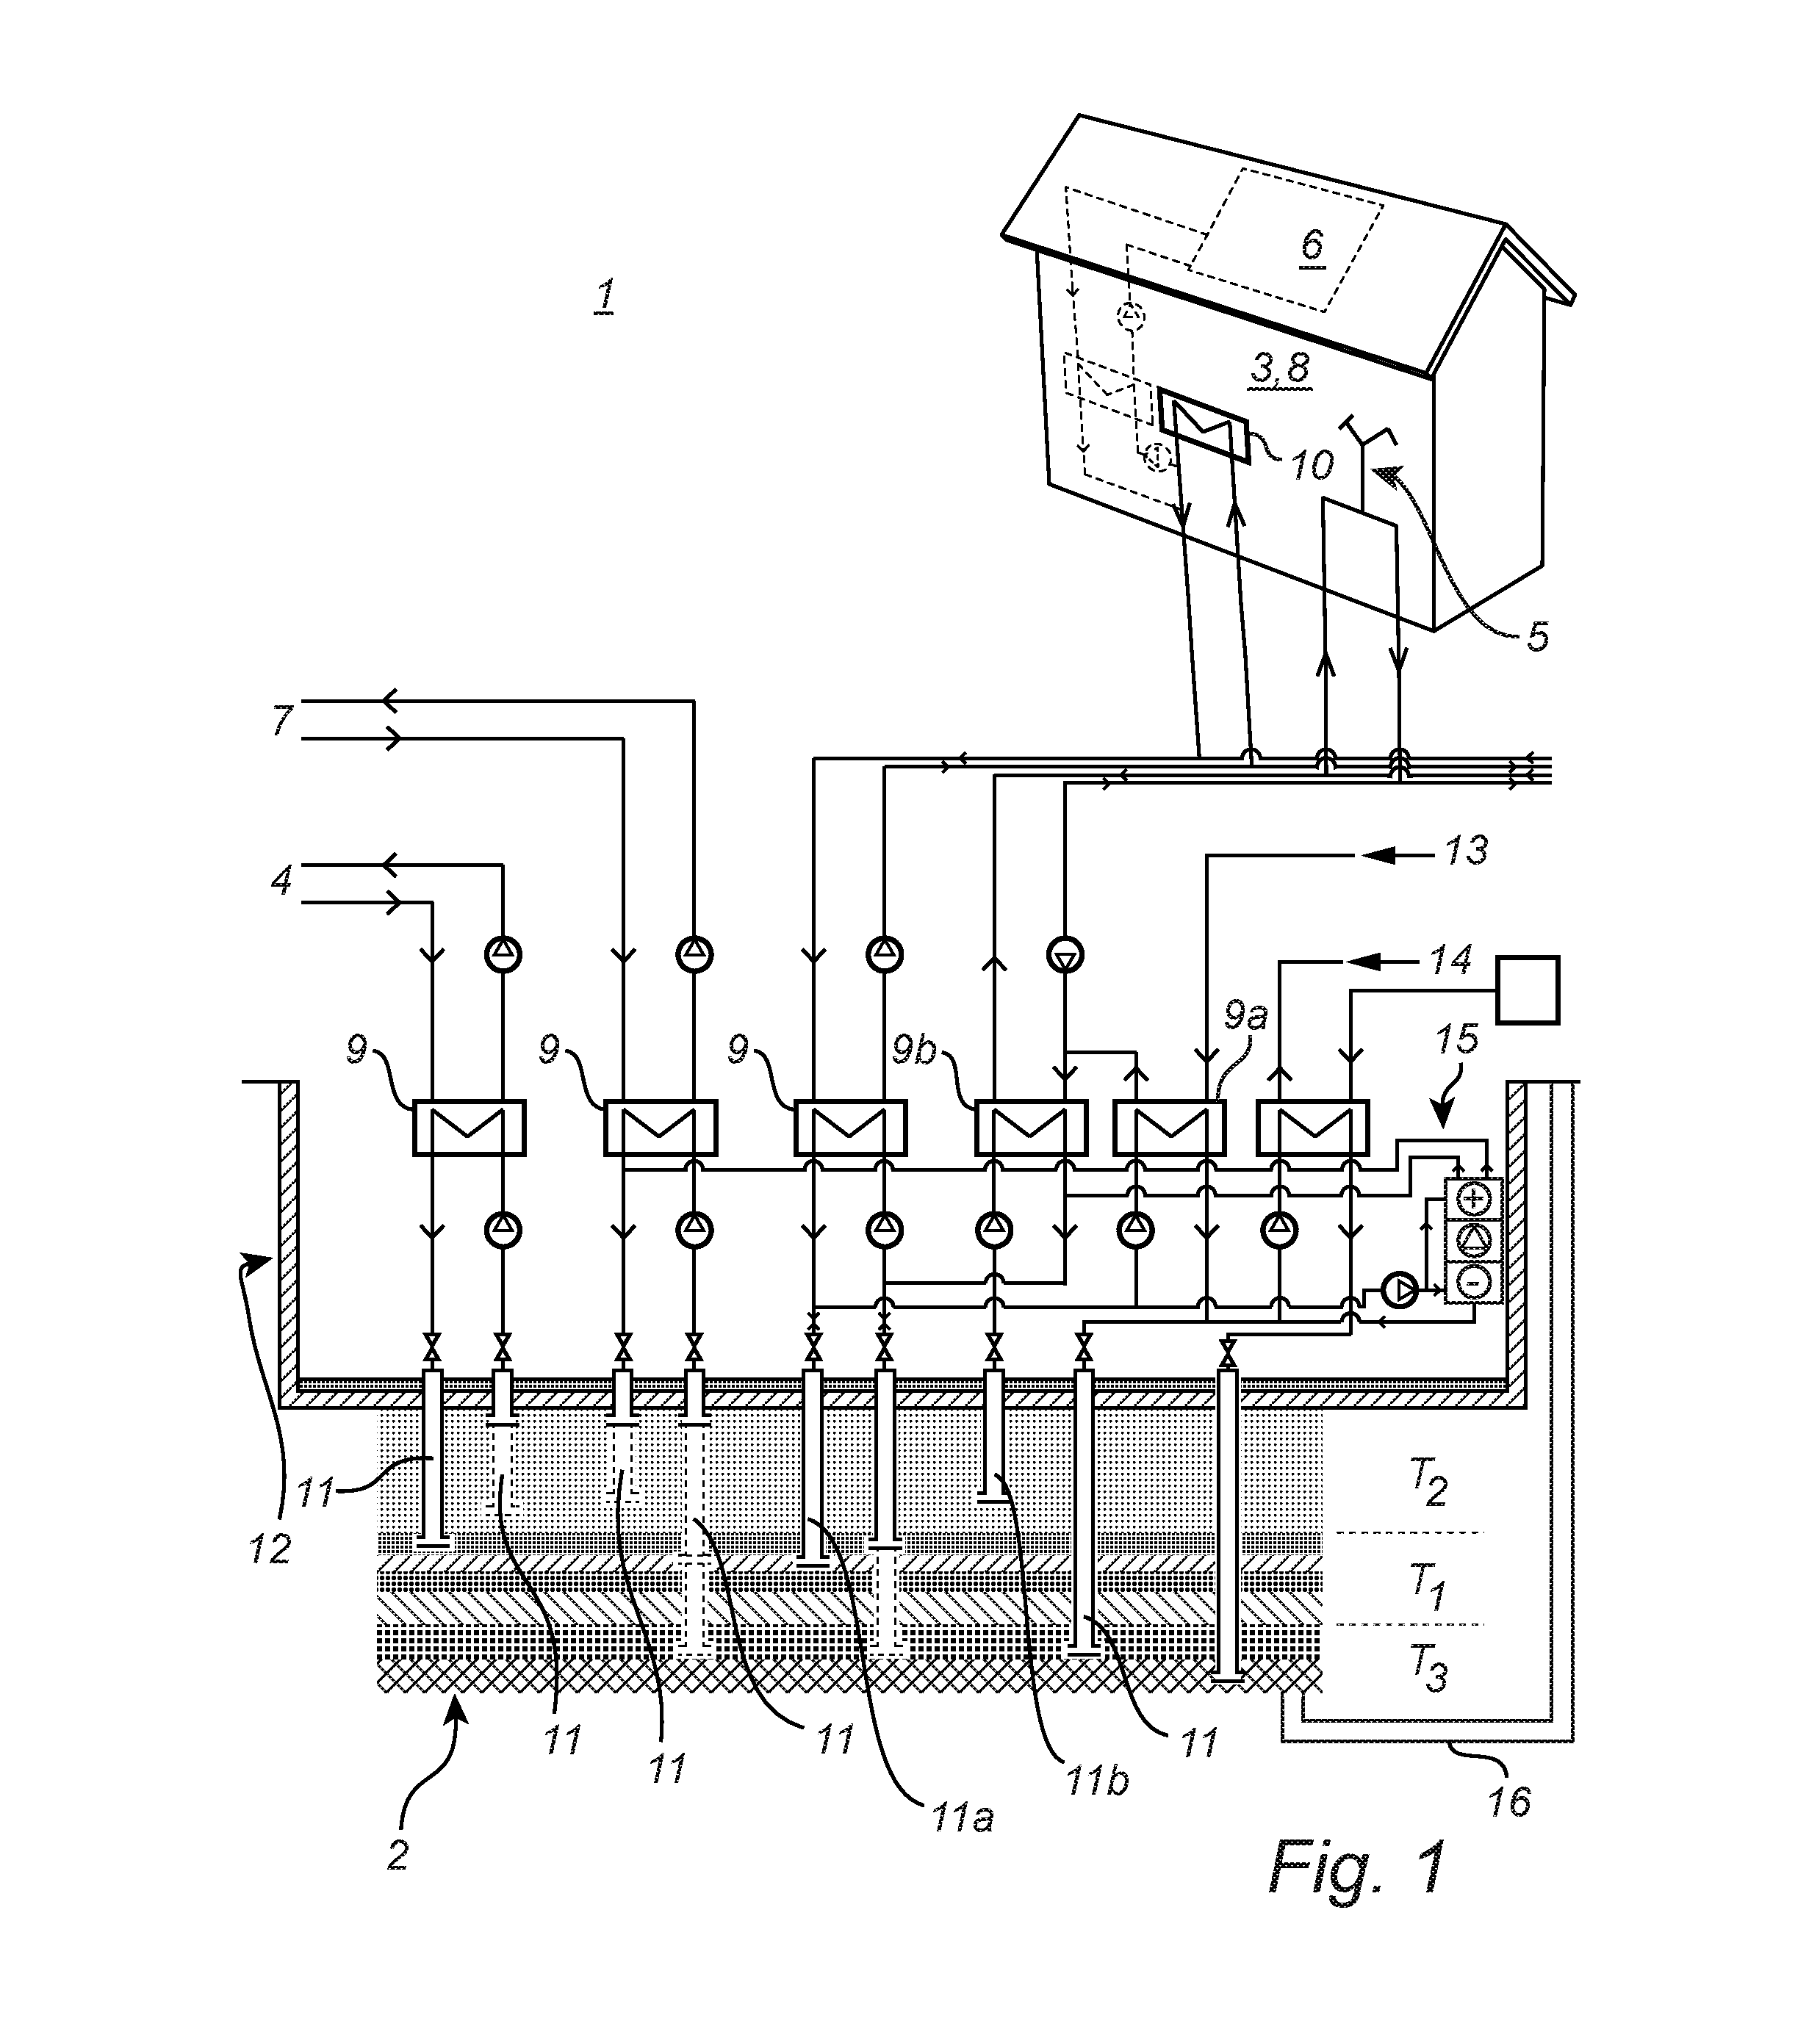 Thermal energy storage system comprising a combined heating and cooling machine and a method for using the thermal energy storage system